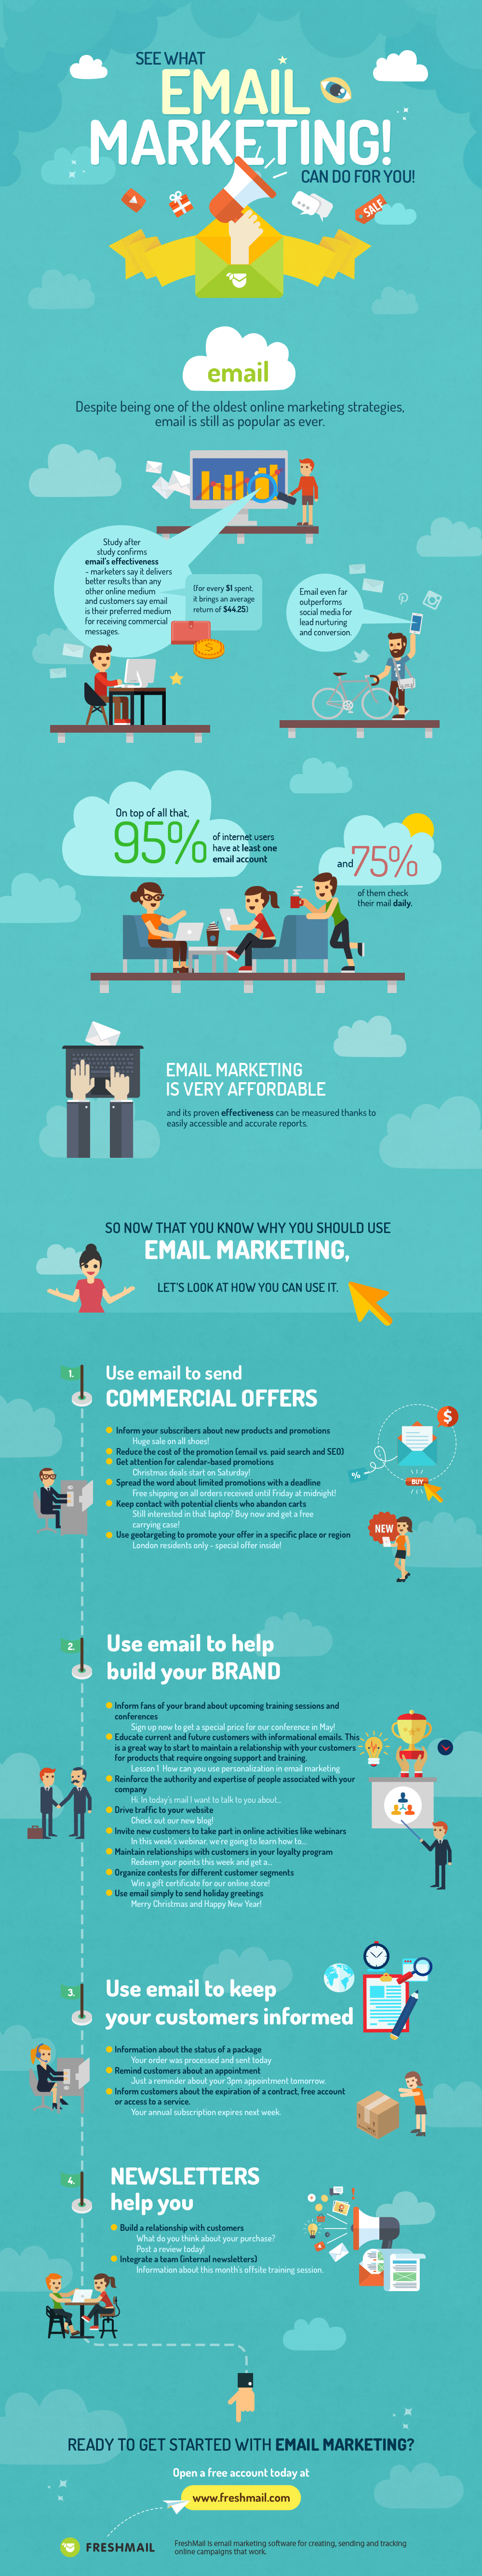 email-marketing2